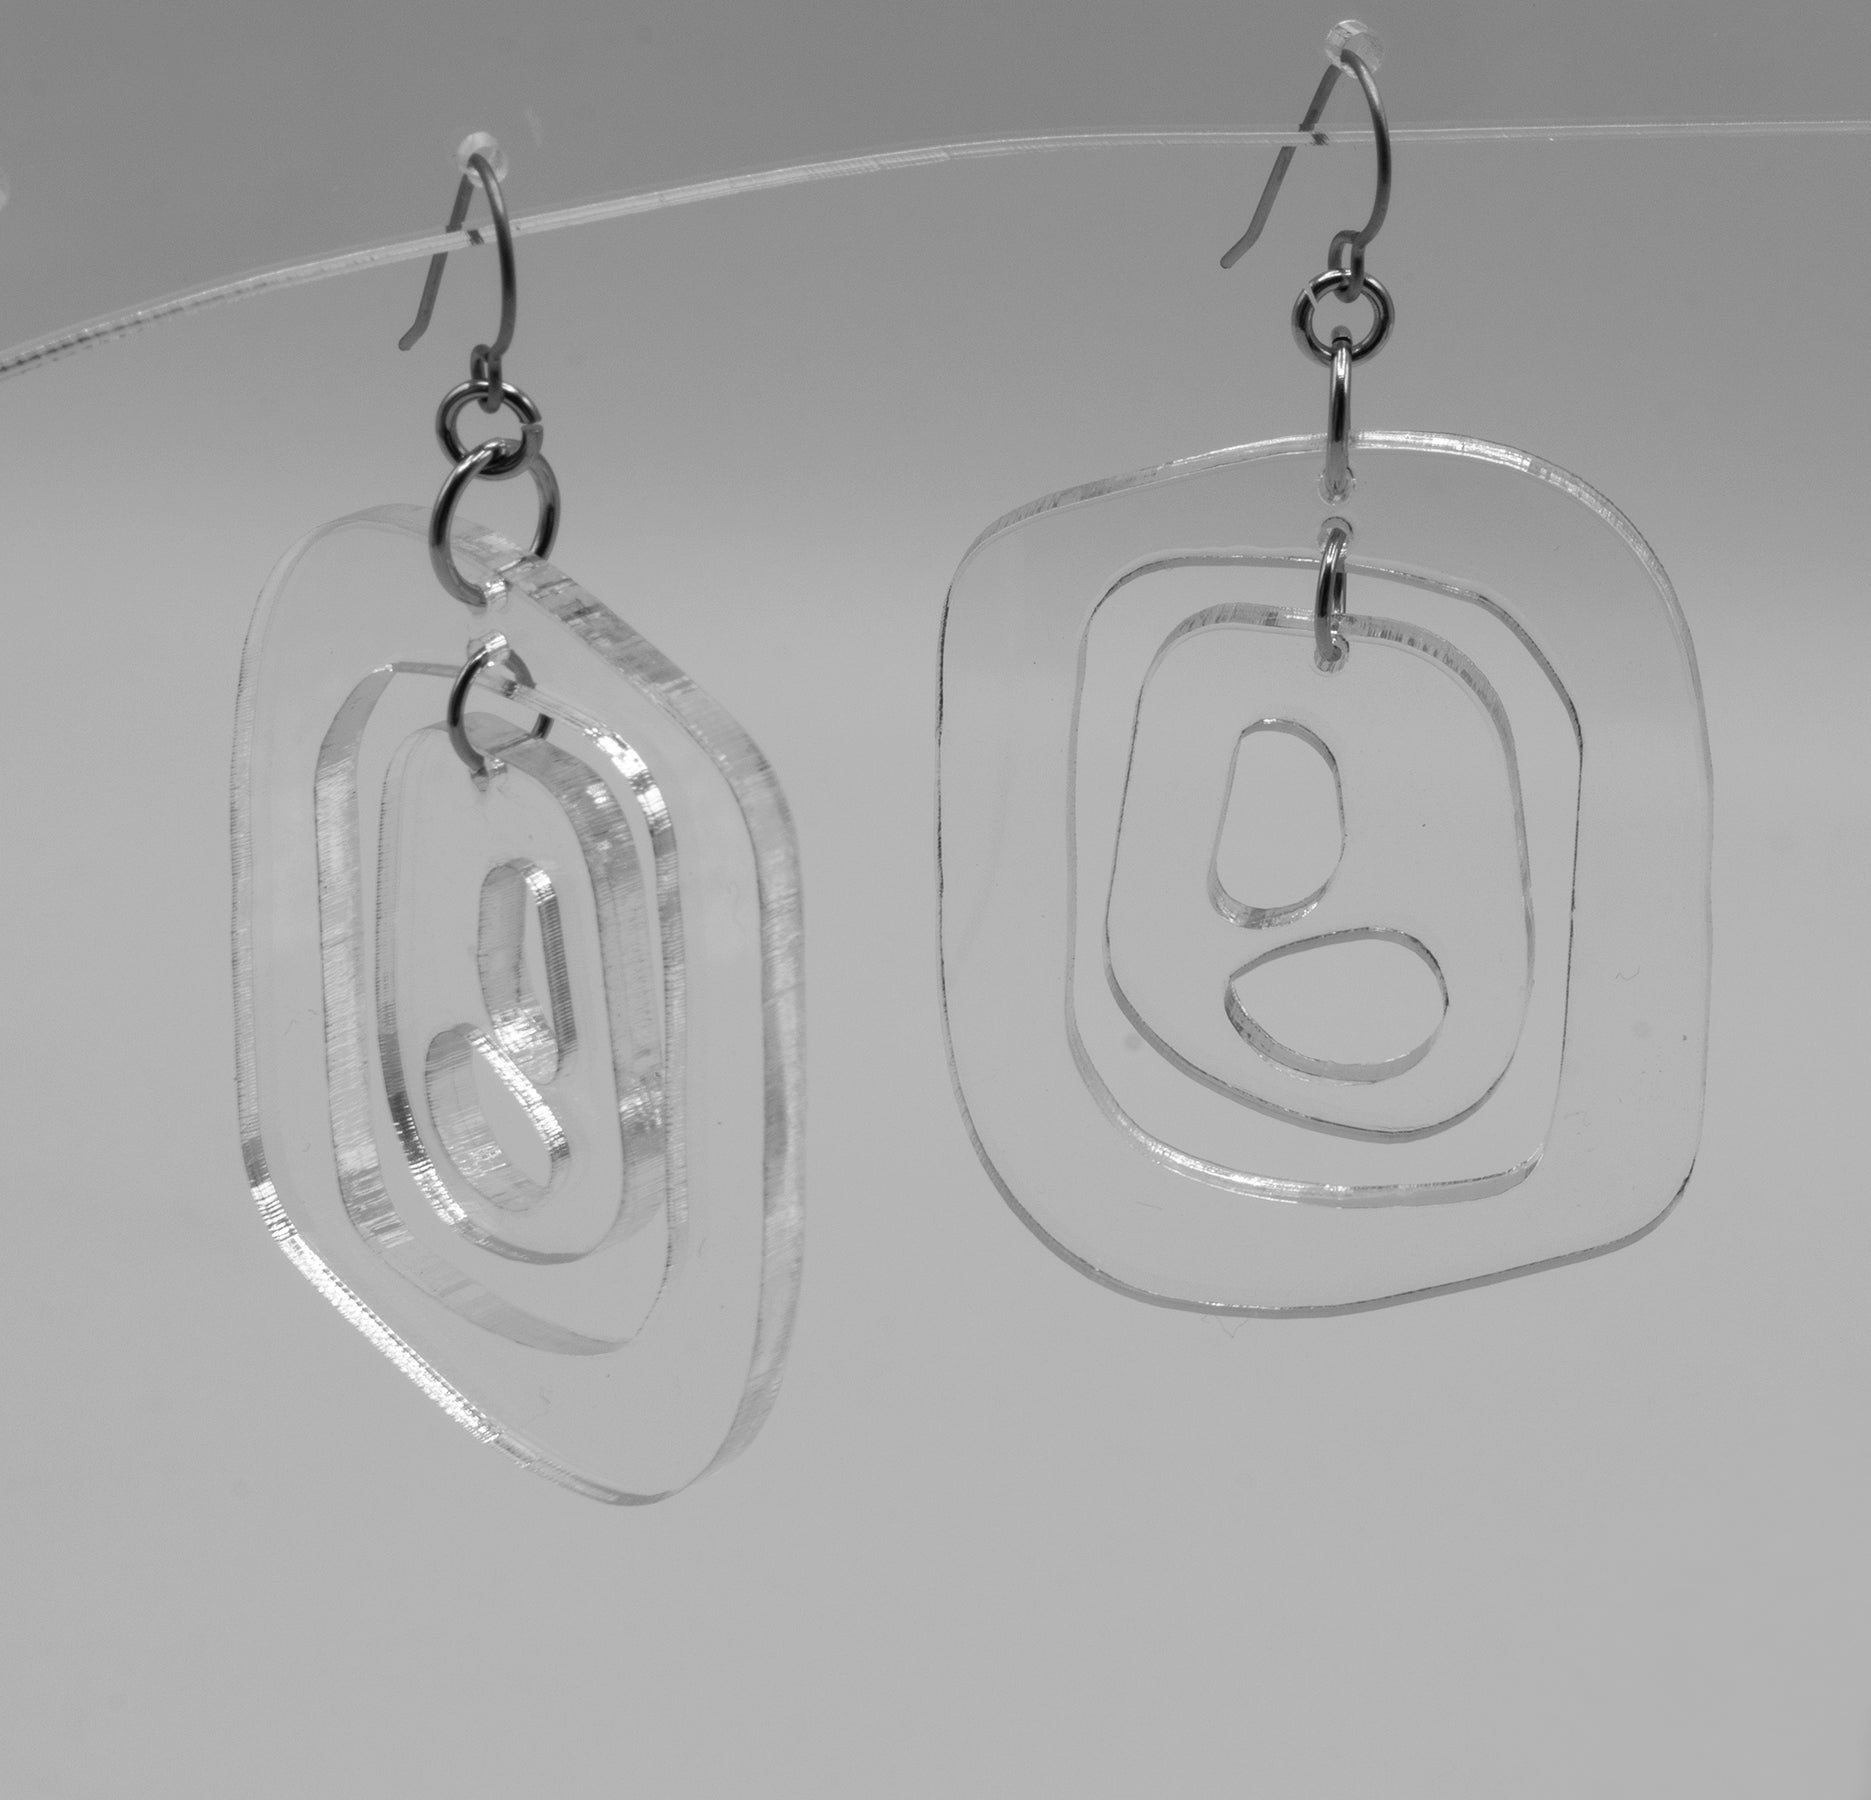 MODular Earrings - Mid 20th Statement Earrings in Clear Acrylic by AtomicMobiles.com - retro era mod handmade jewelry